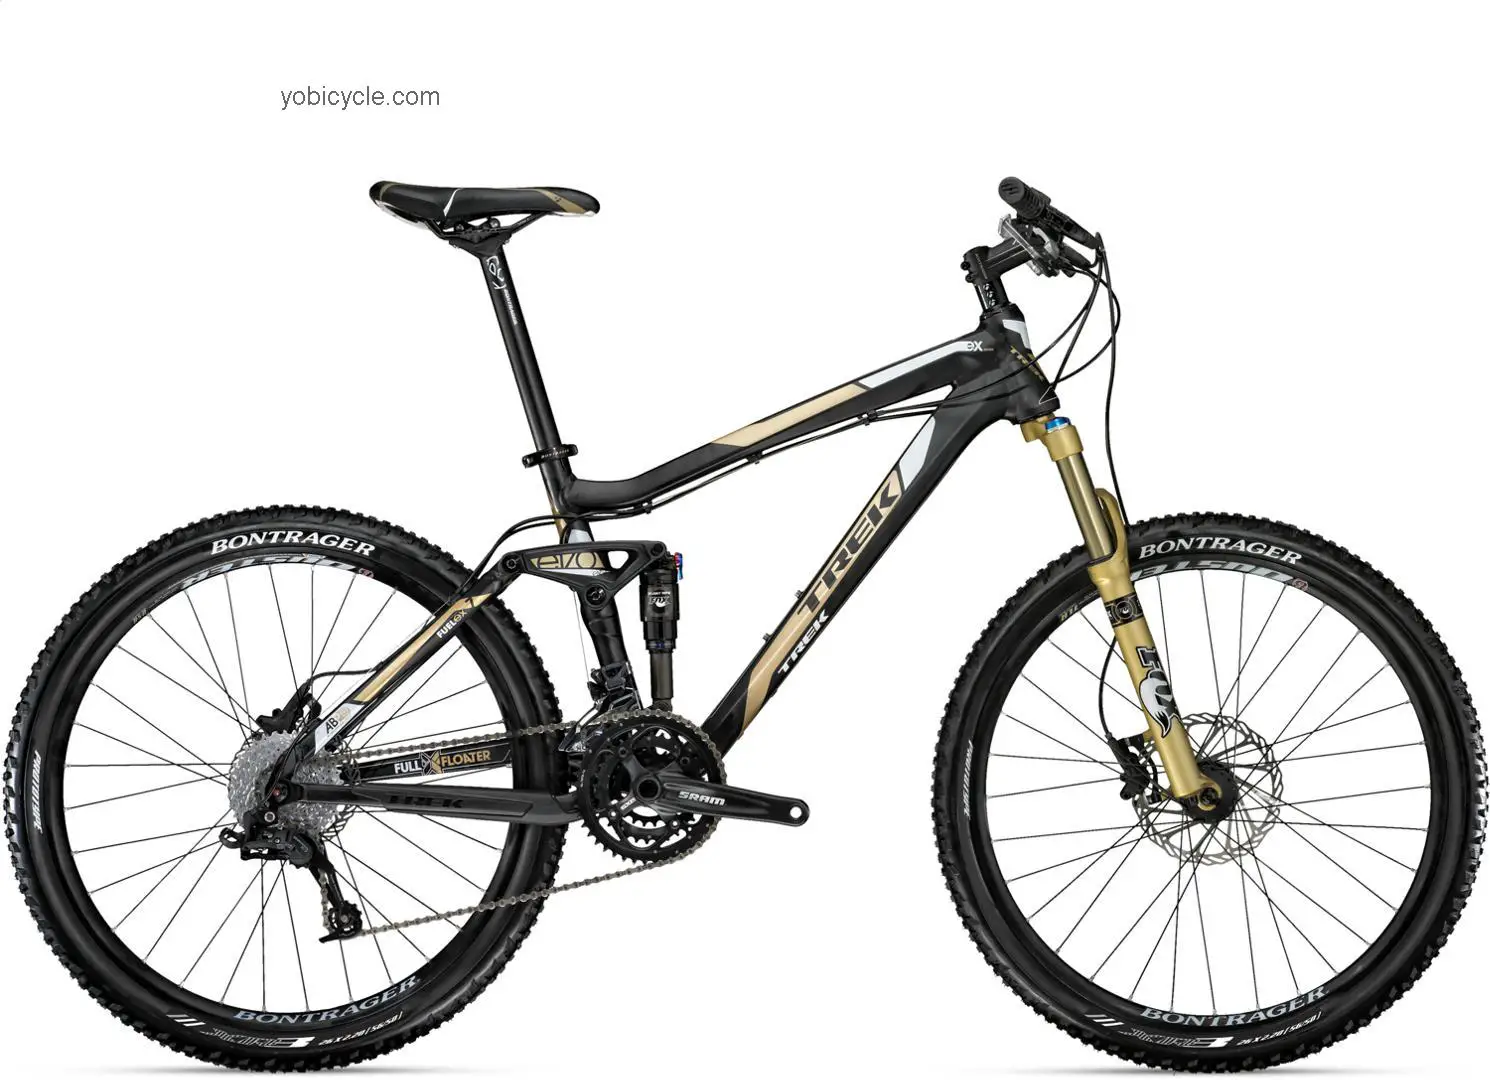 Trek Fuel EX 7 competitors and comparison tool online specs and performance